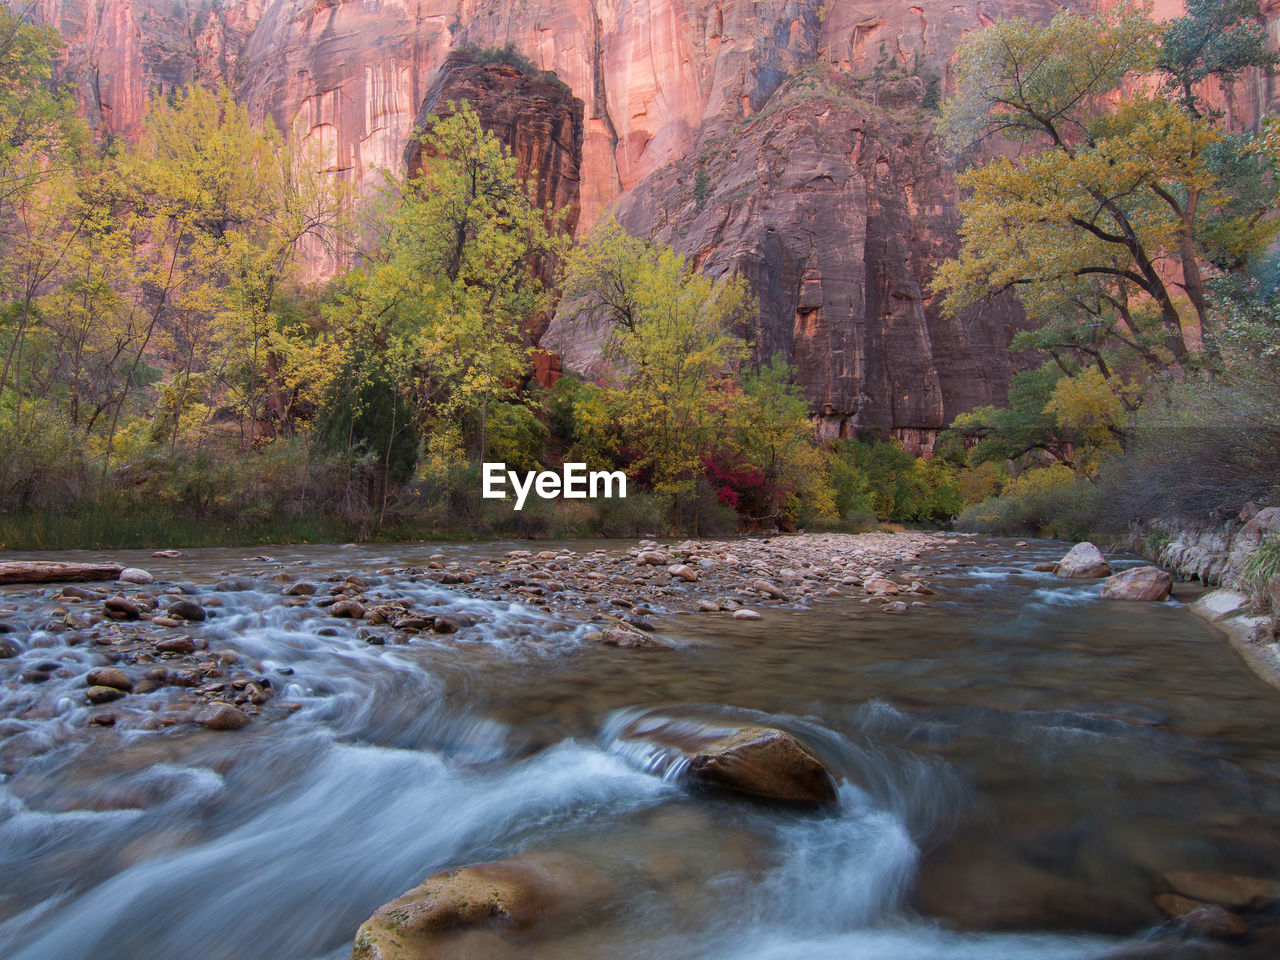 Natural landscape in autumn in the narrows at zion national park in usa